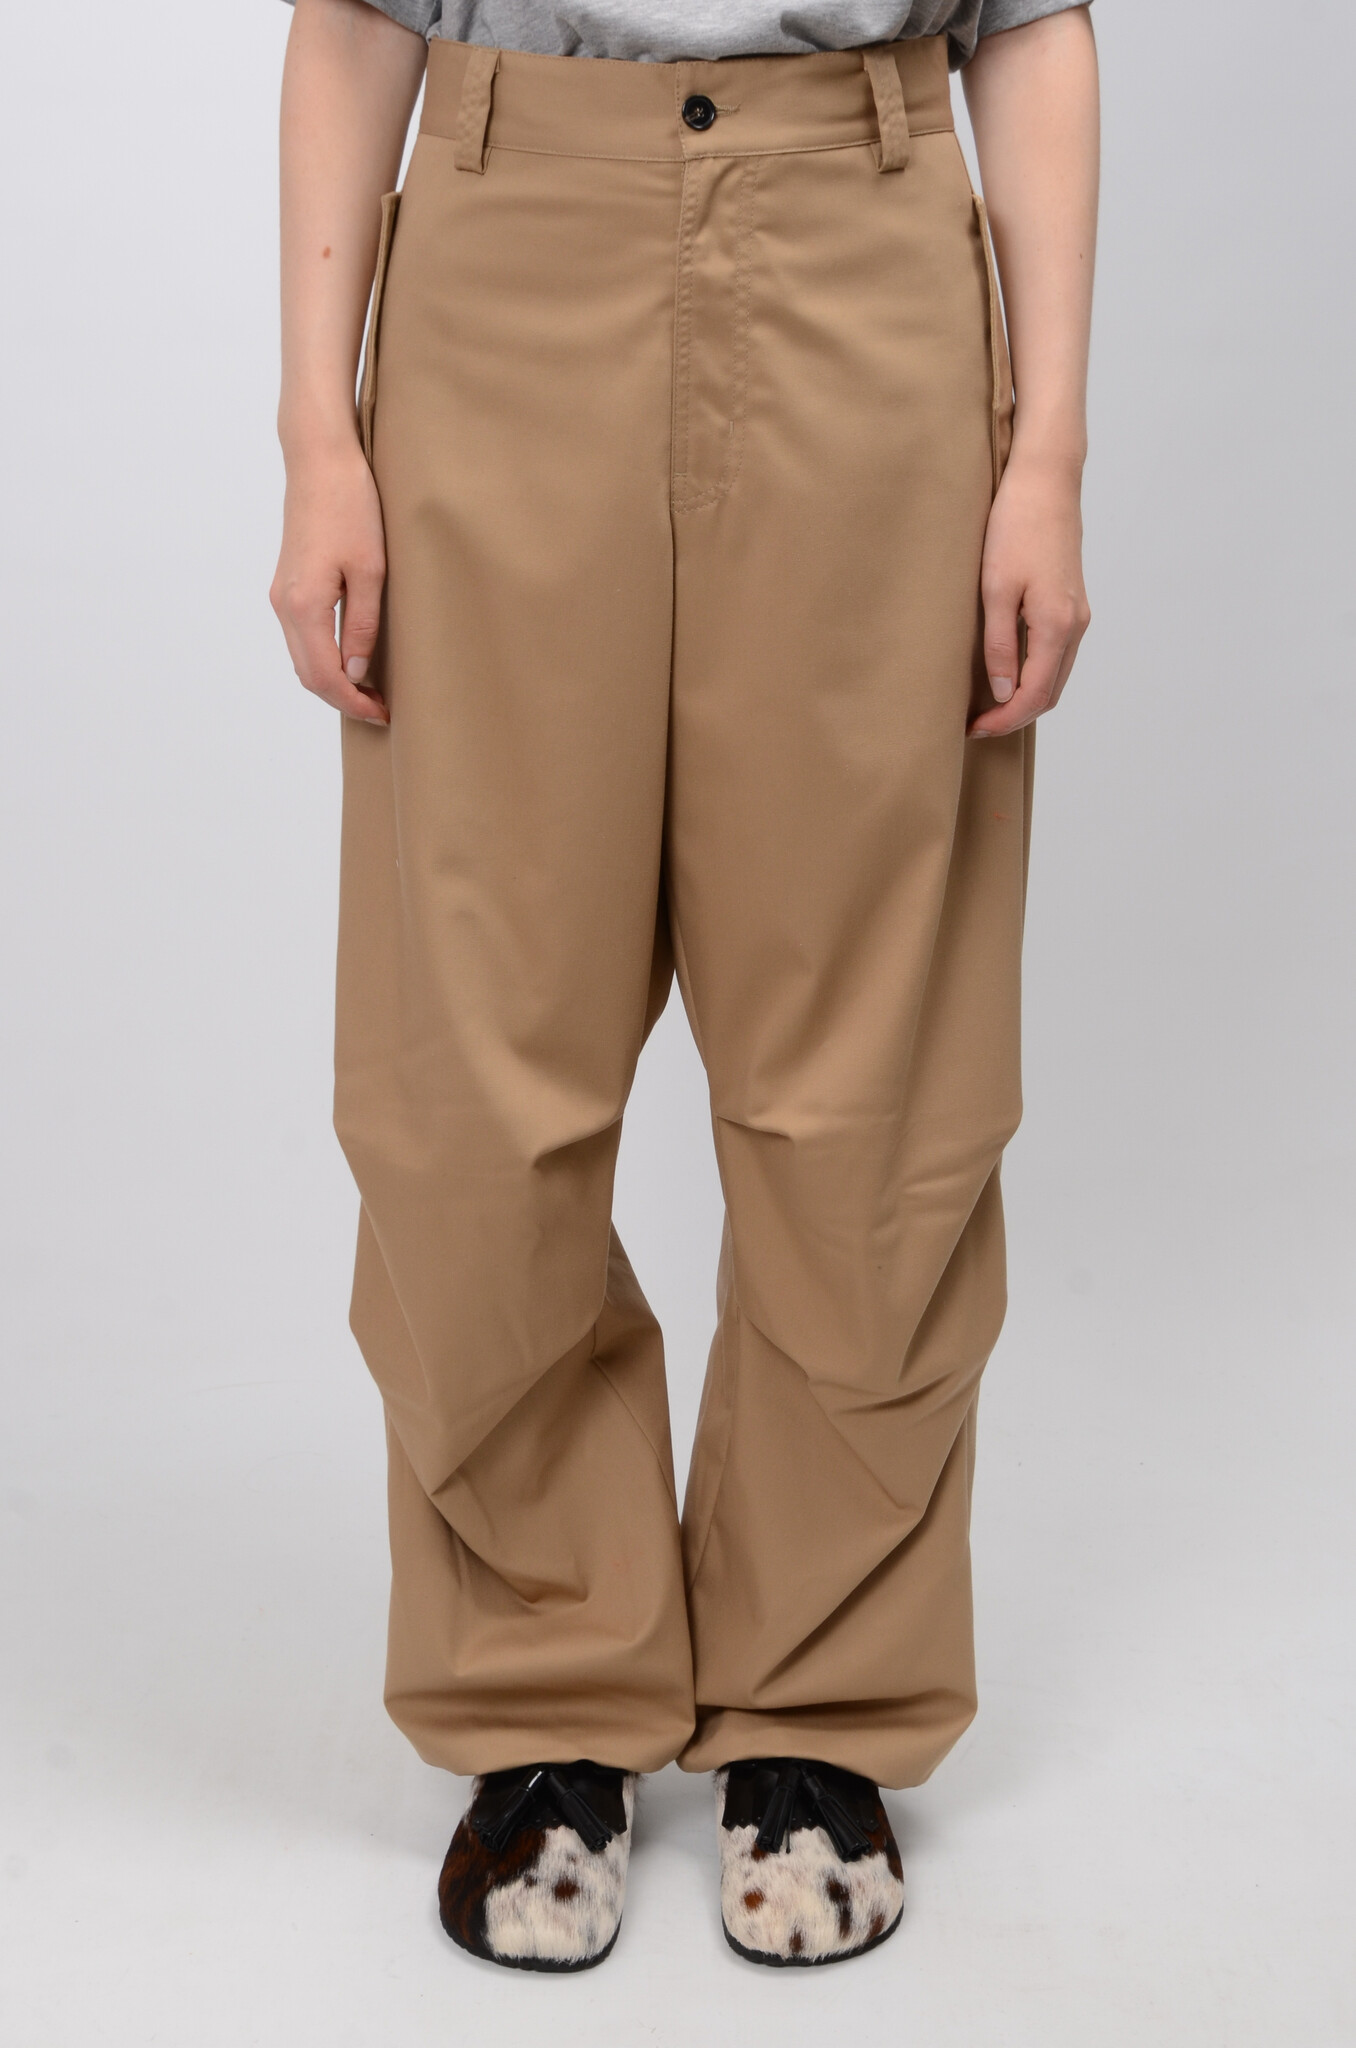 Parachute-Style, Baggy Trousers in Sand-3